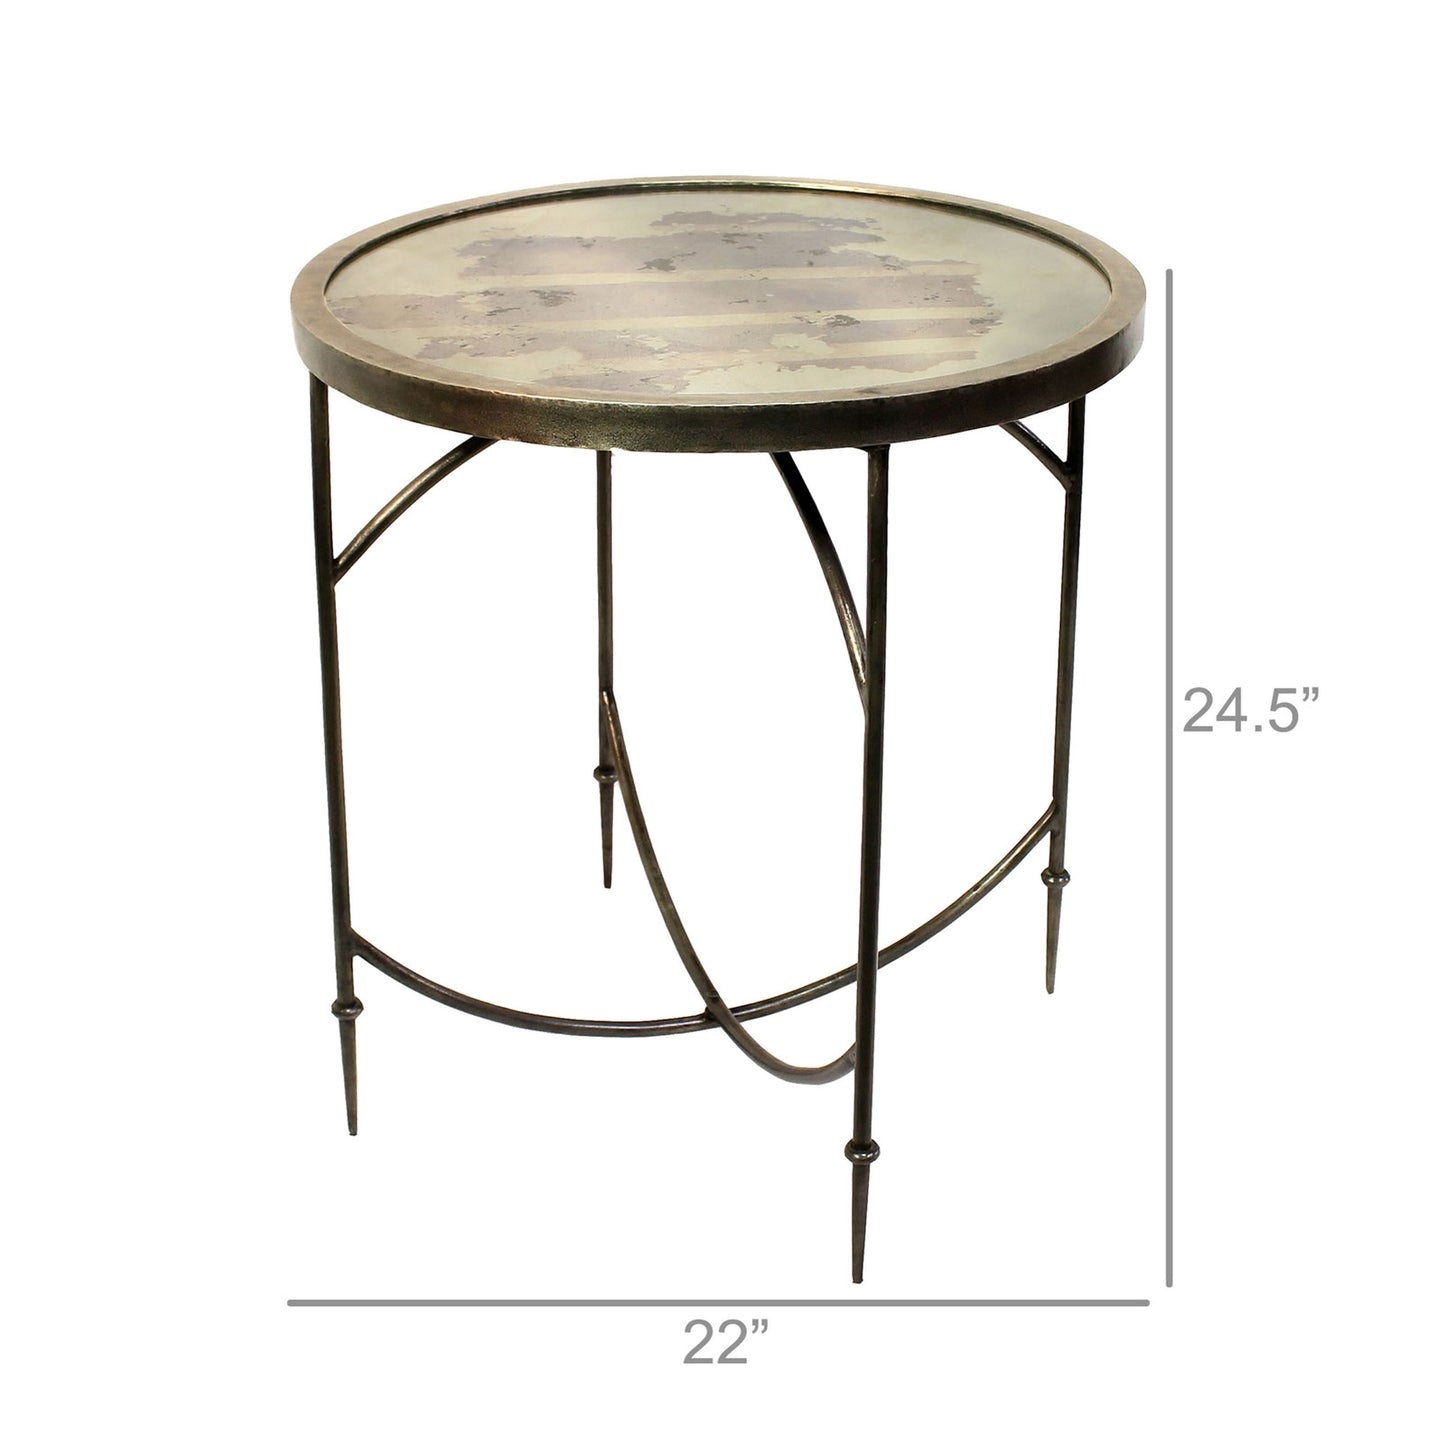 Mirrored Side Table in Antique Nickel (Pick Up / Local Delivery Only)